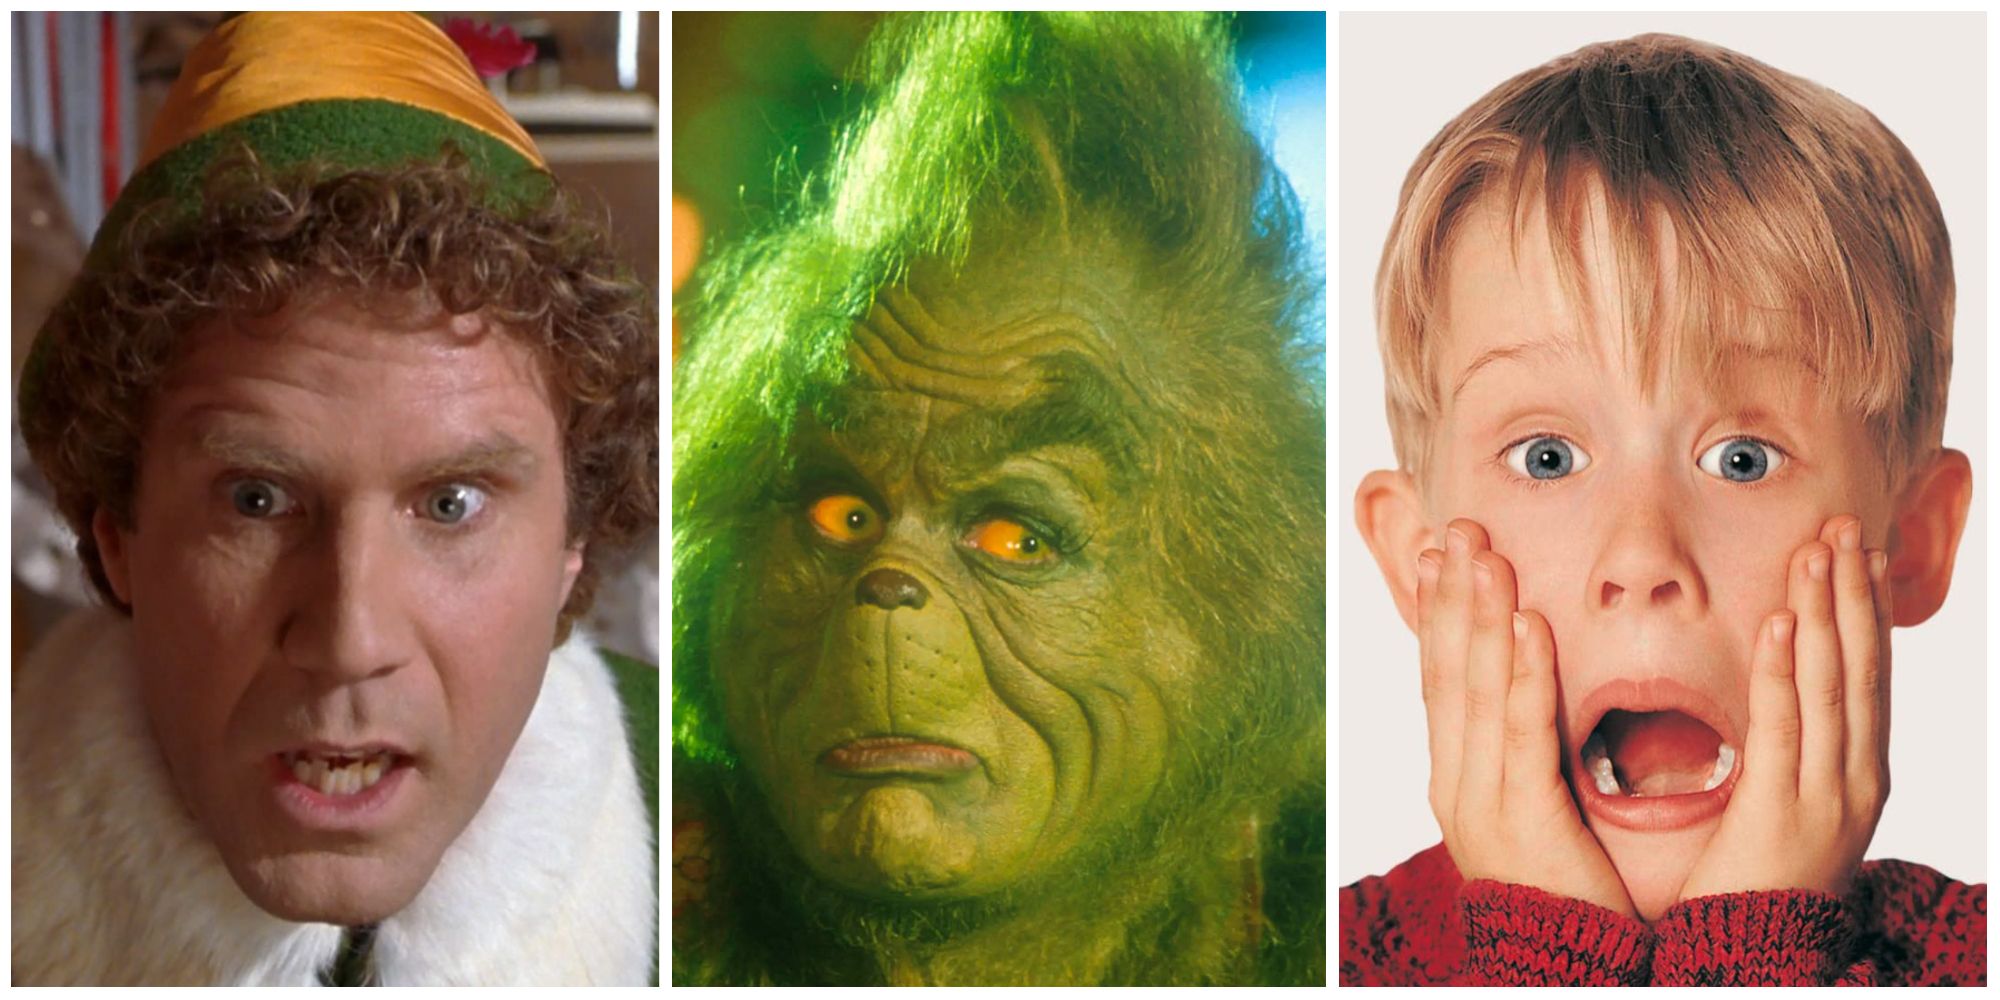 10 Best Christmas Comedy Movies Elf The Grinch Home Alone